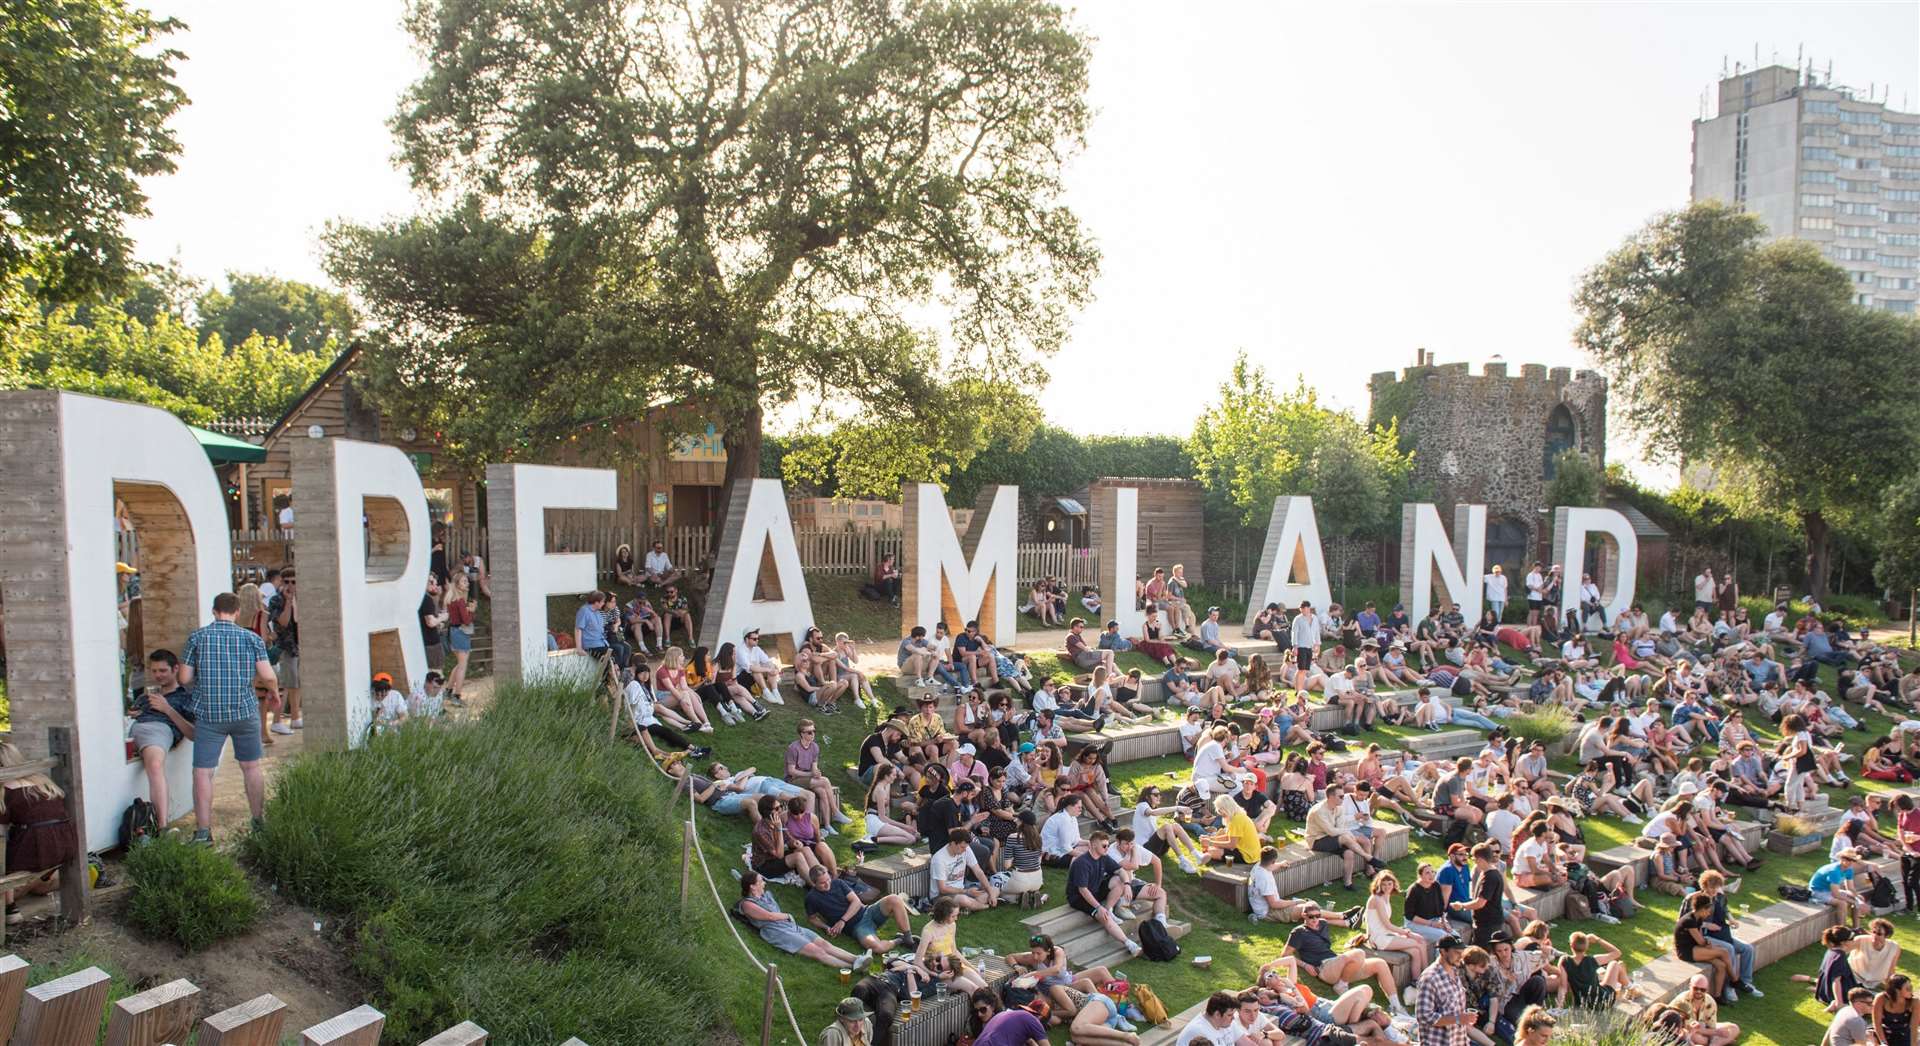 Dreamland in Margate to host two major music acts as part of 100 year ...